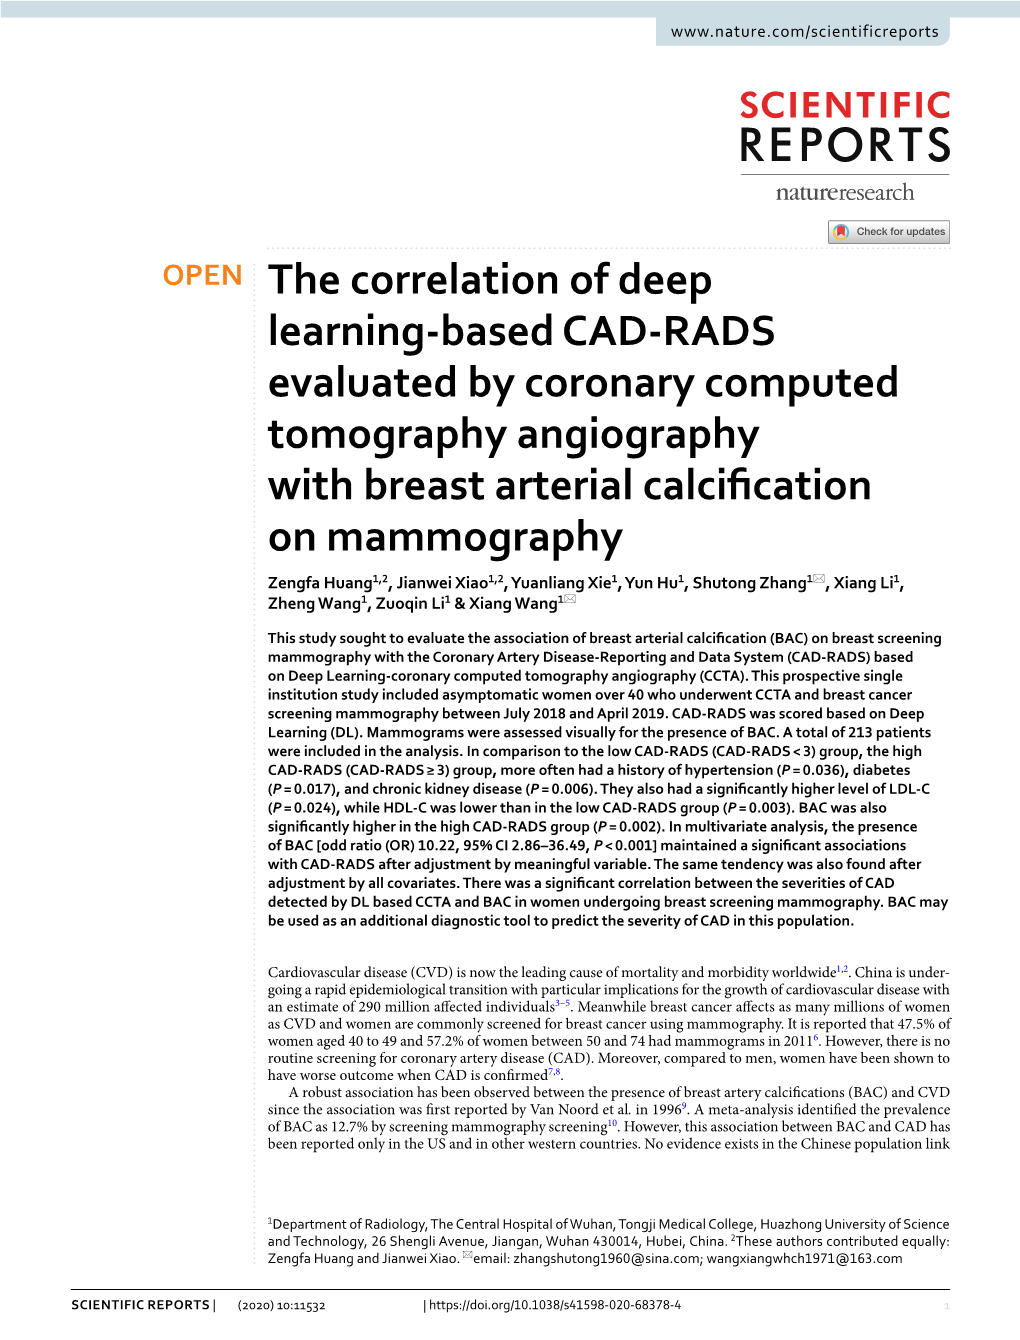 The Correlation of Deep Learning-Based CAD-RADS